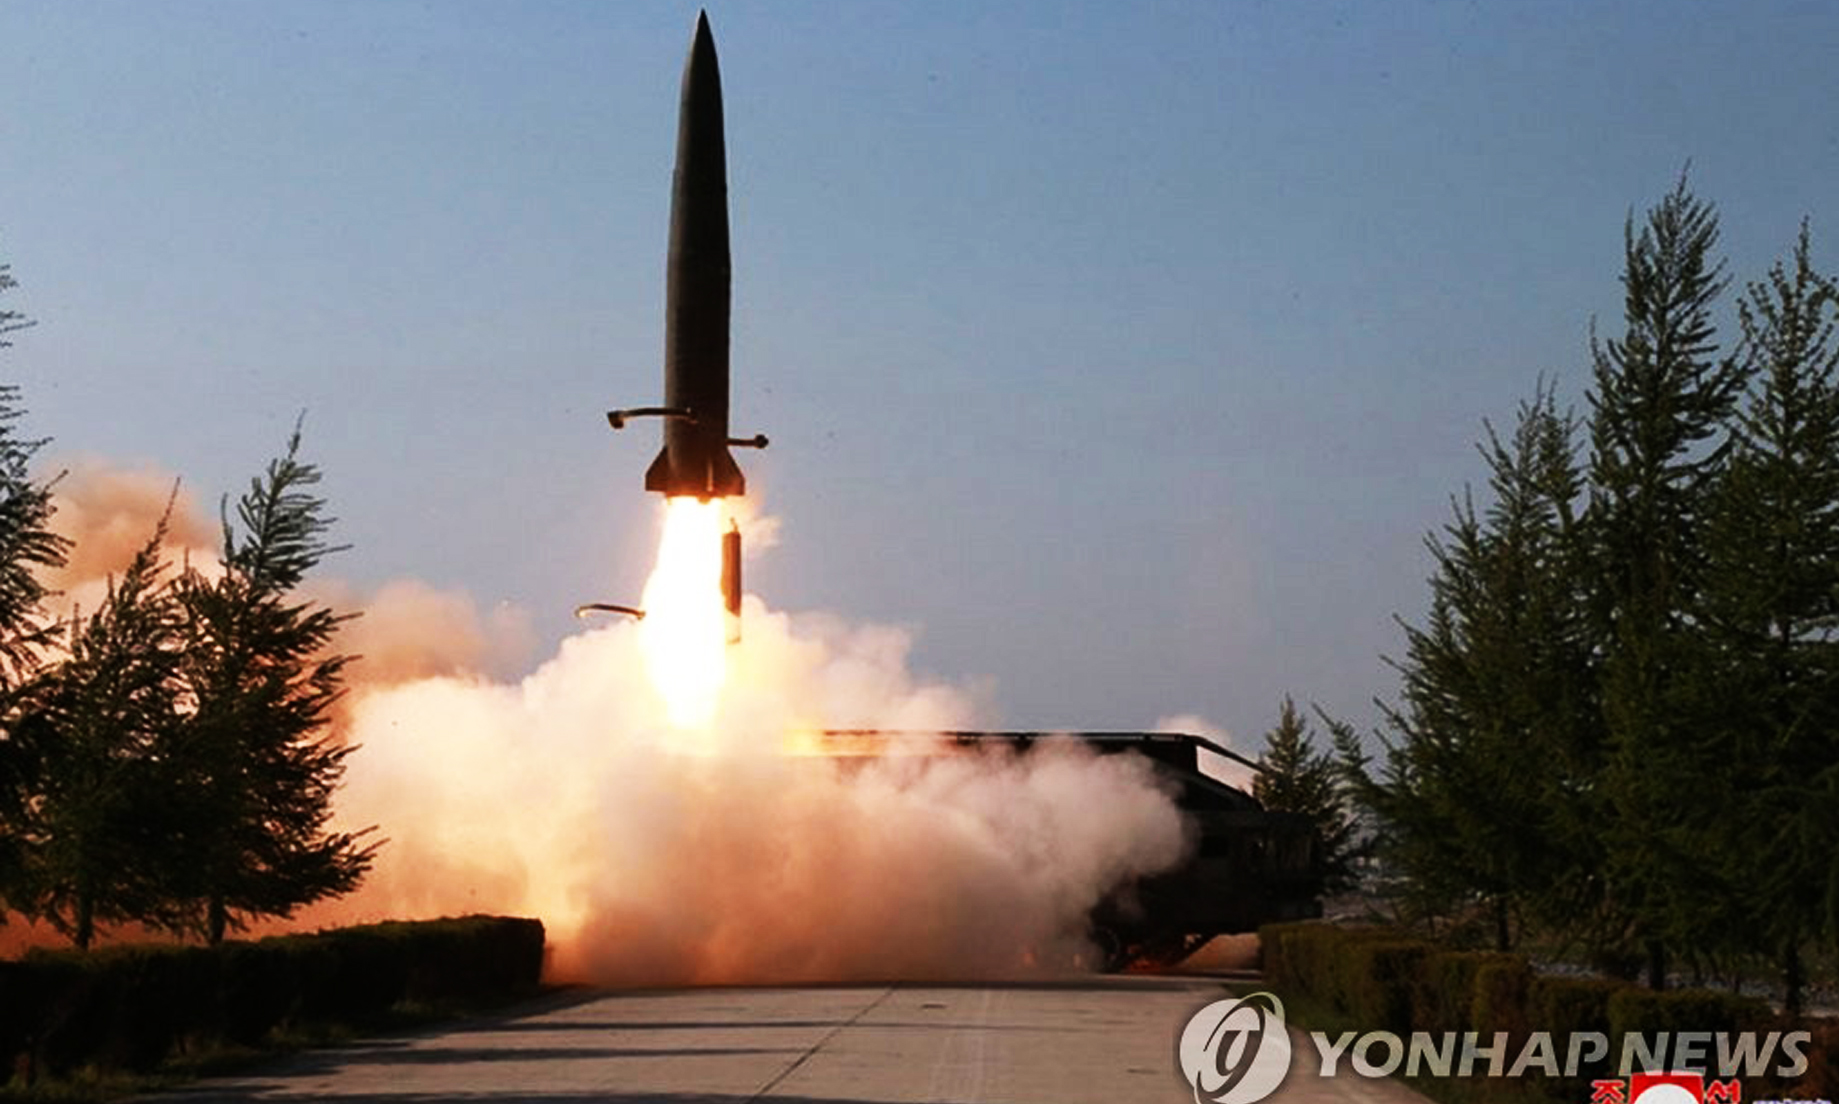 North Korea fired projectiles from around Wonsan: South Korea